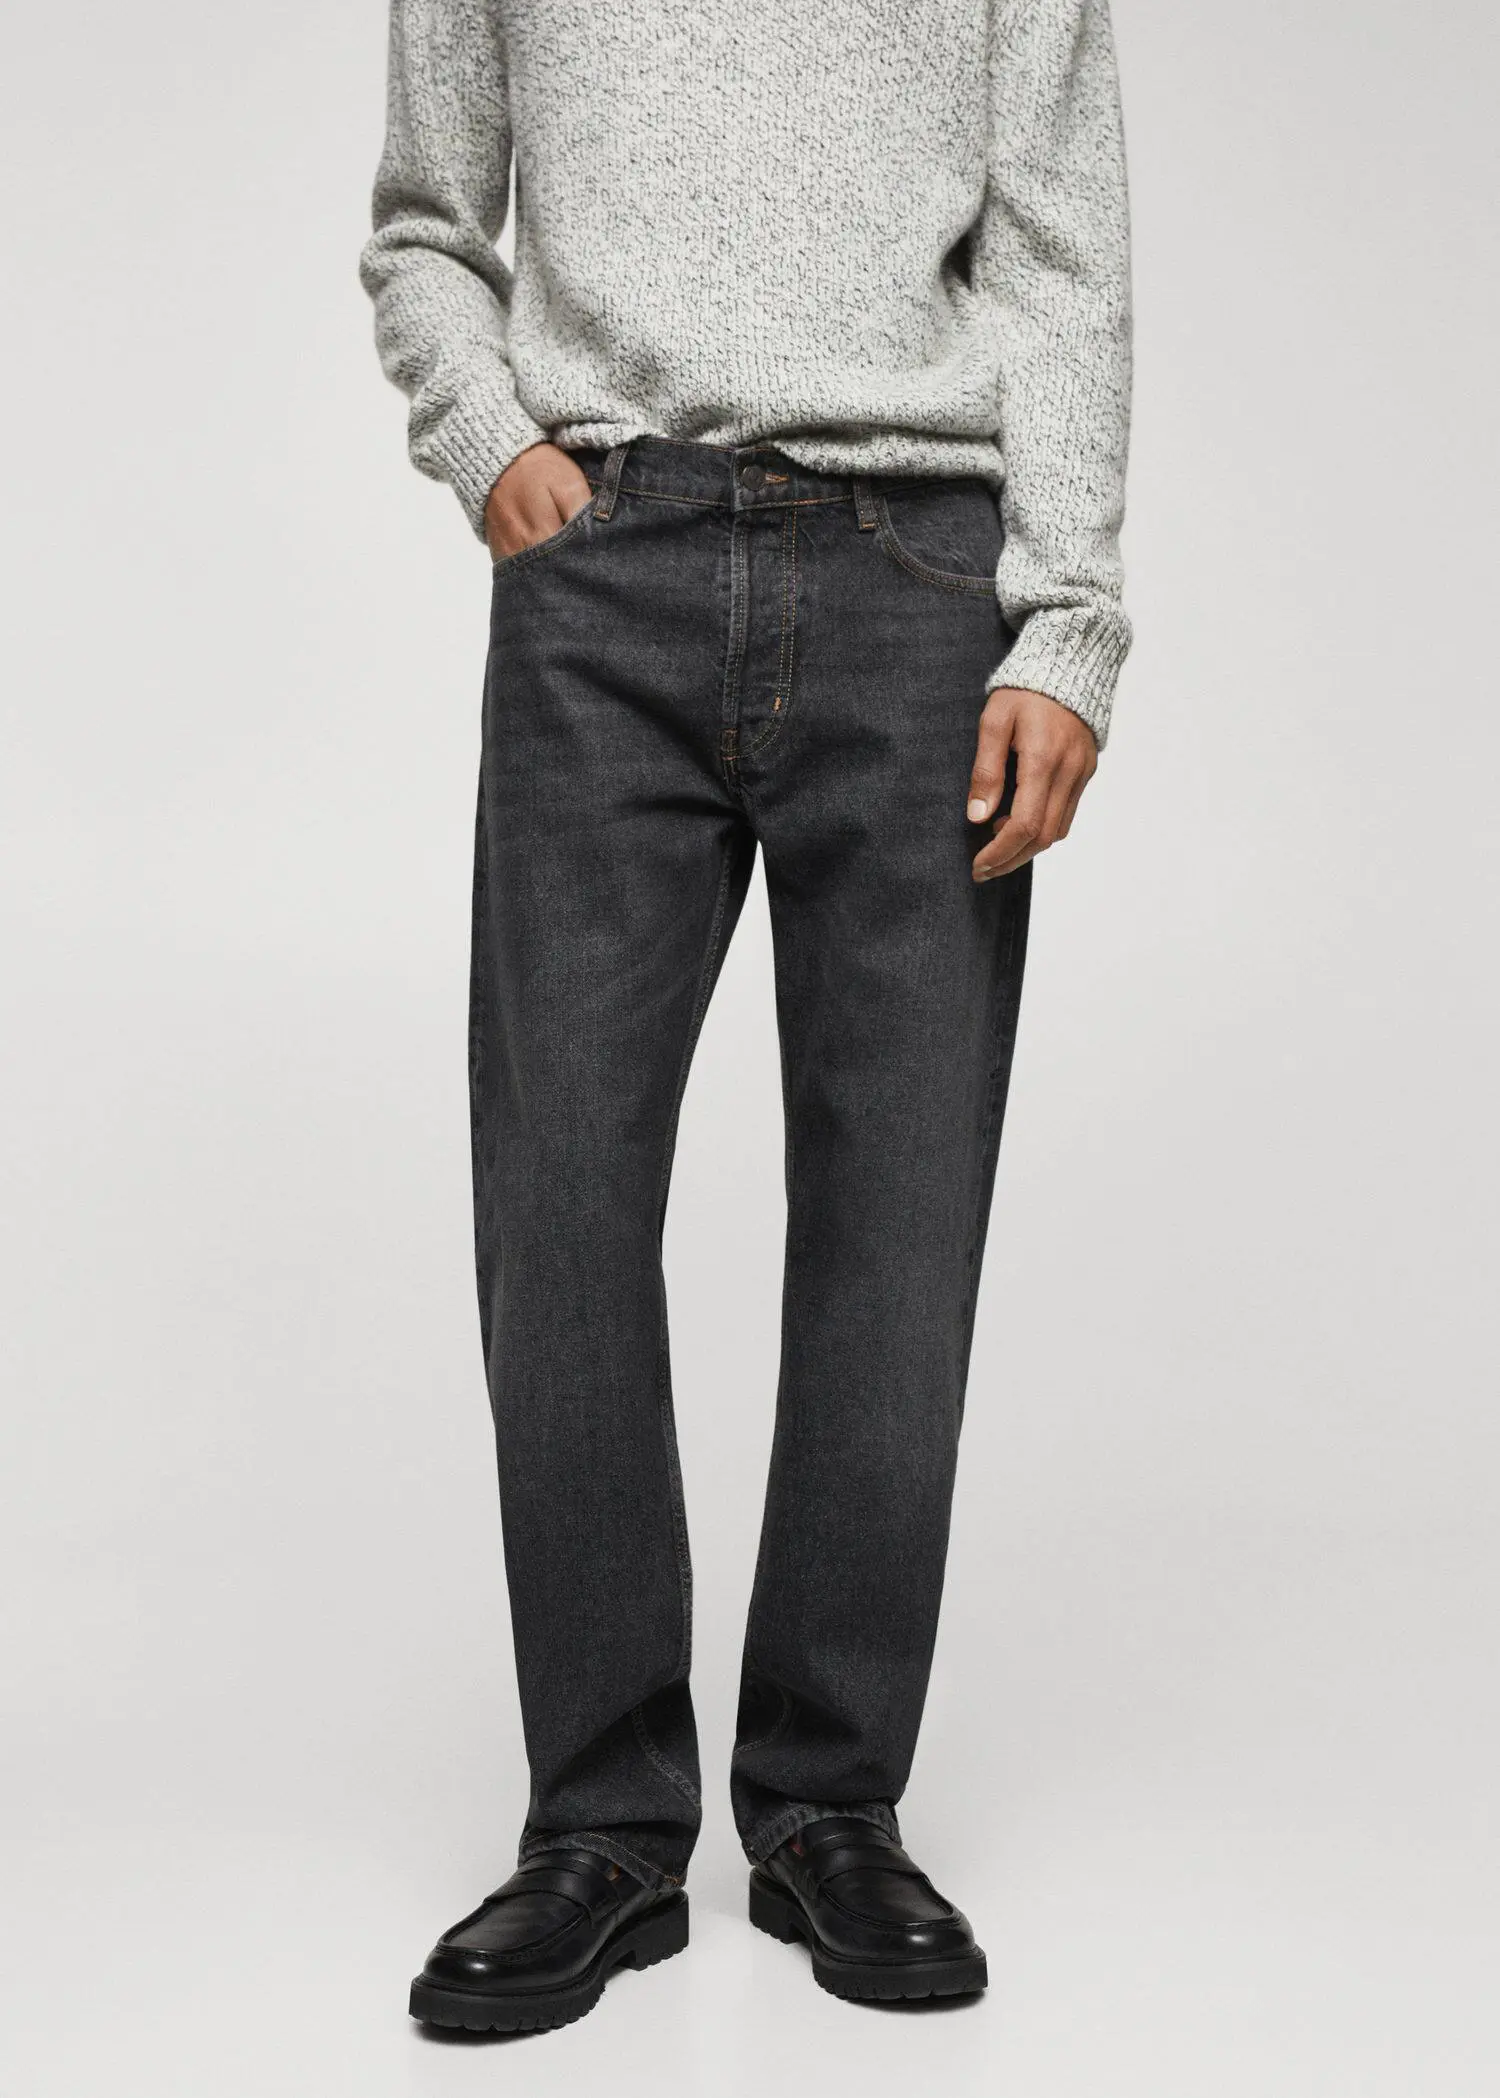 Mango Relaxed fit dark wash jeans. 1